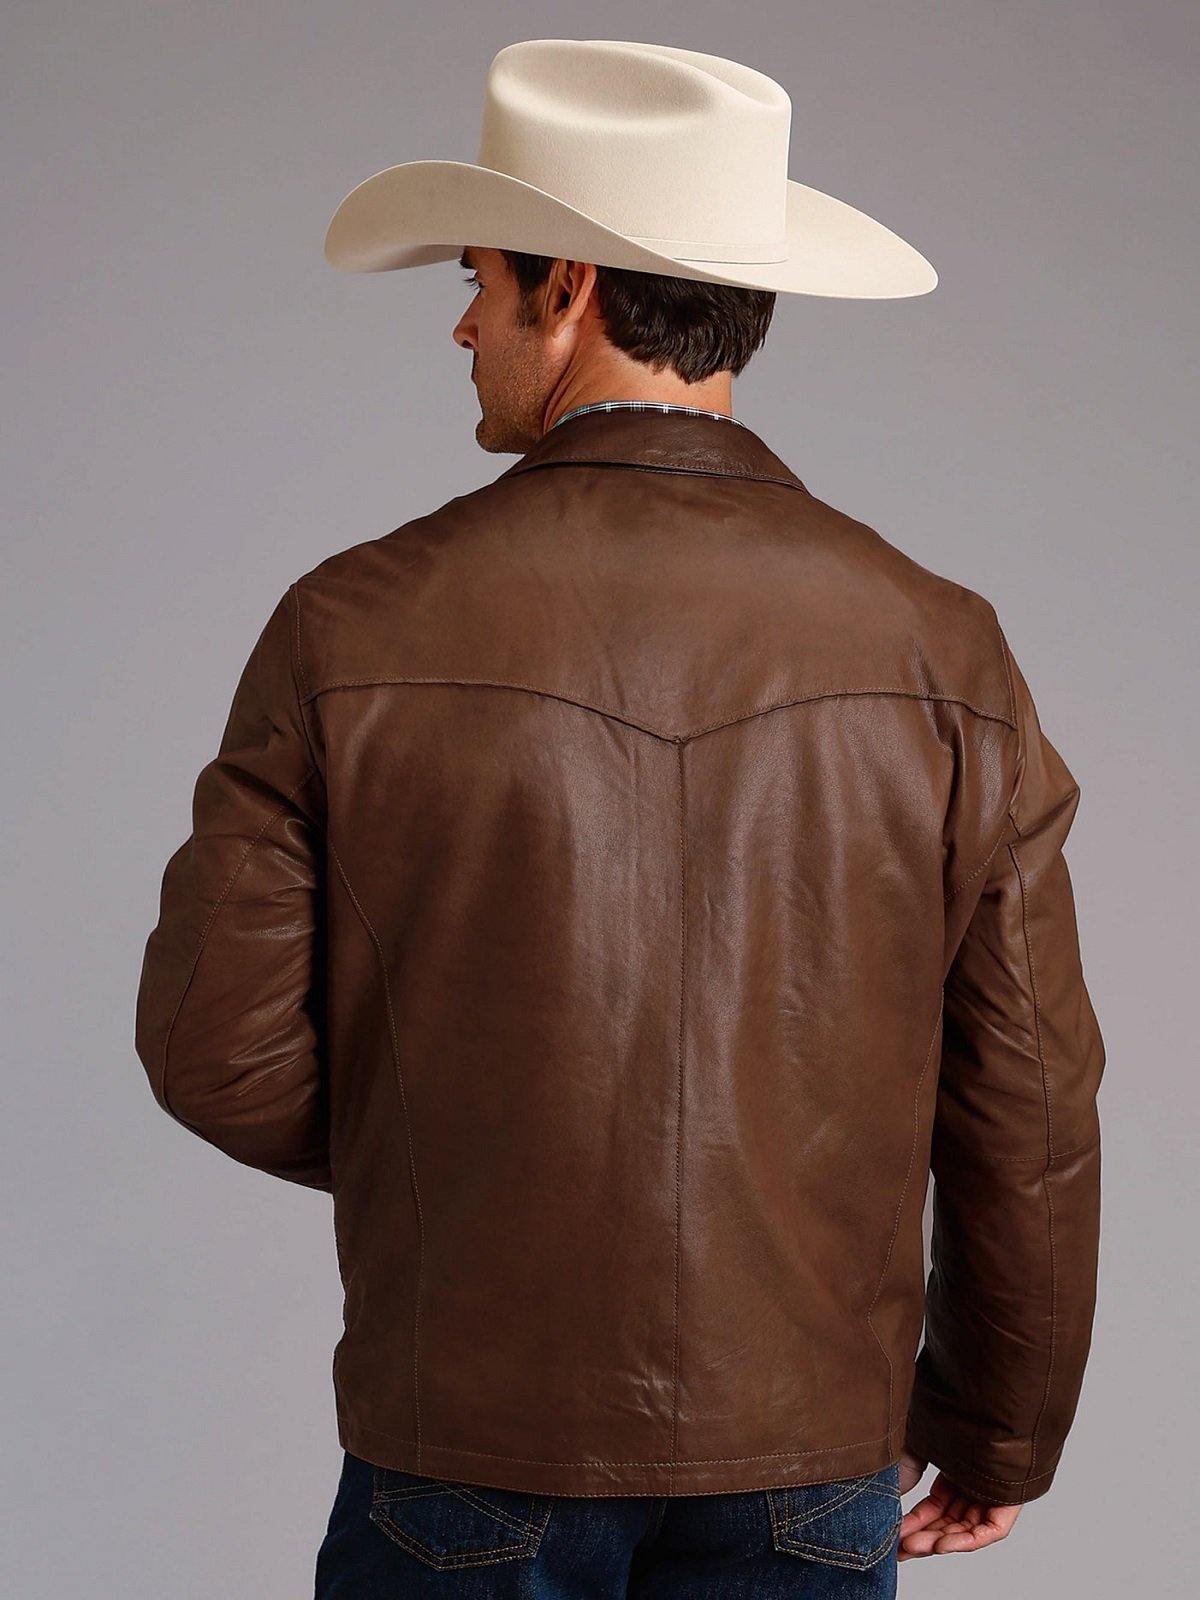 Rustic Brown Pure Leather Cowboy Jacket for Men